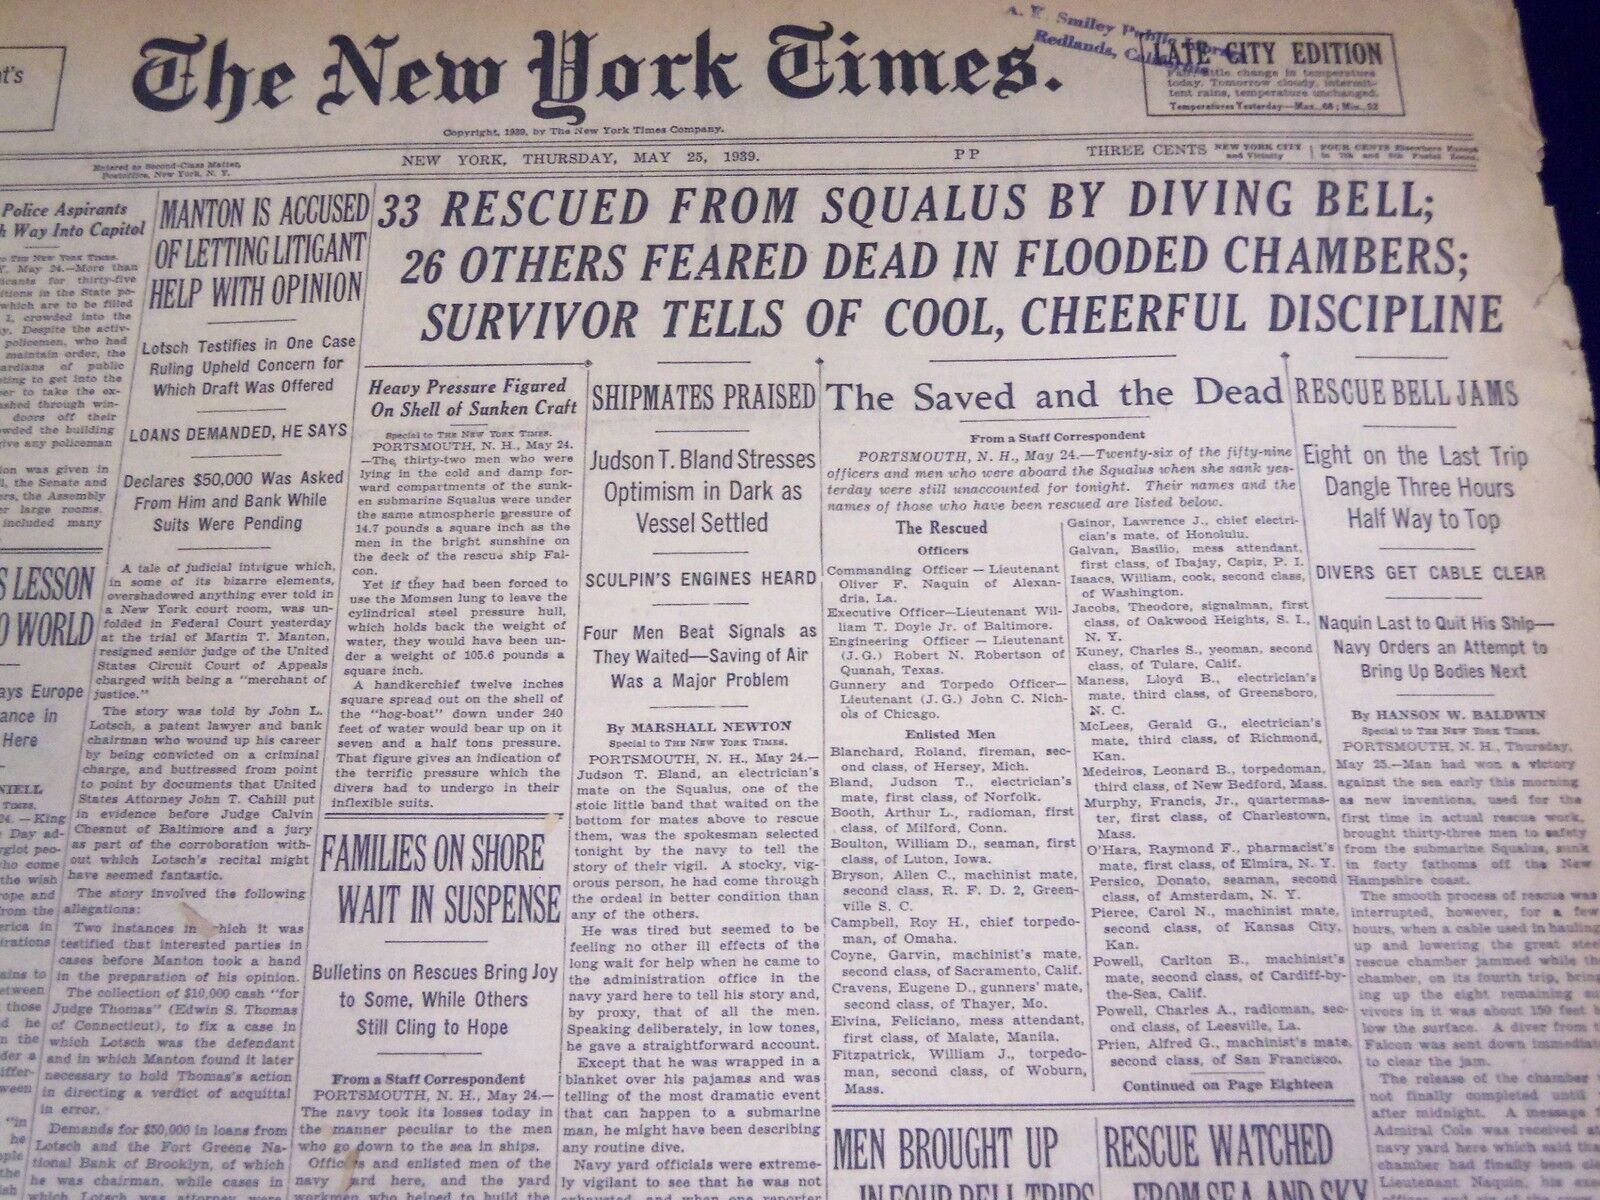 1939 MAY 25 NEW YORK TIMES - 33 RESCUED FROM SQUALUS BY DRIVING BELL - NT 589